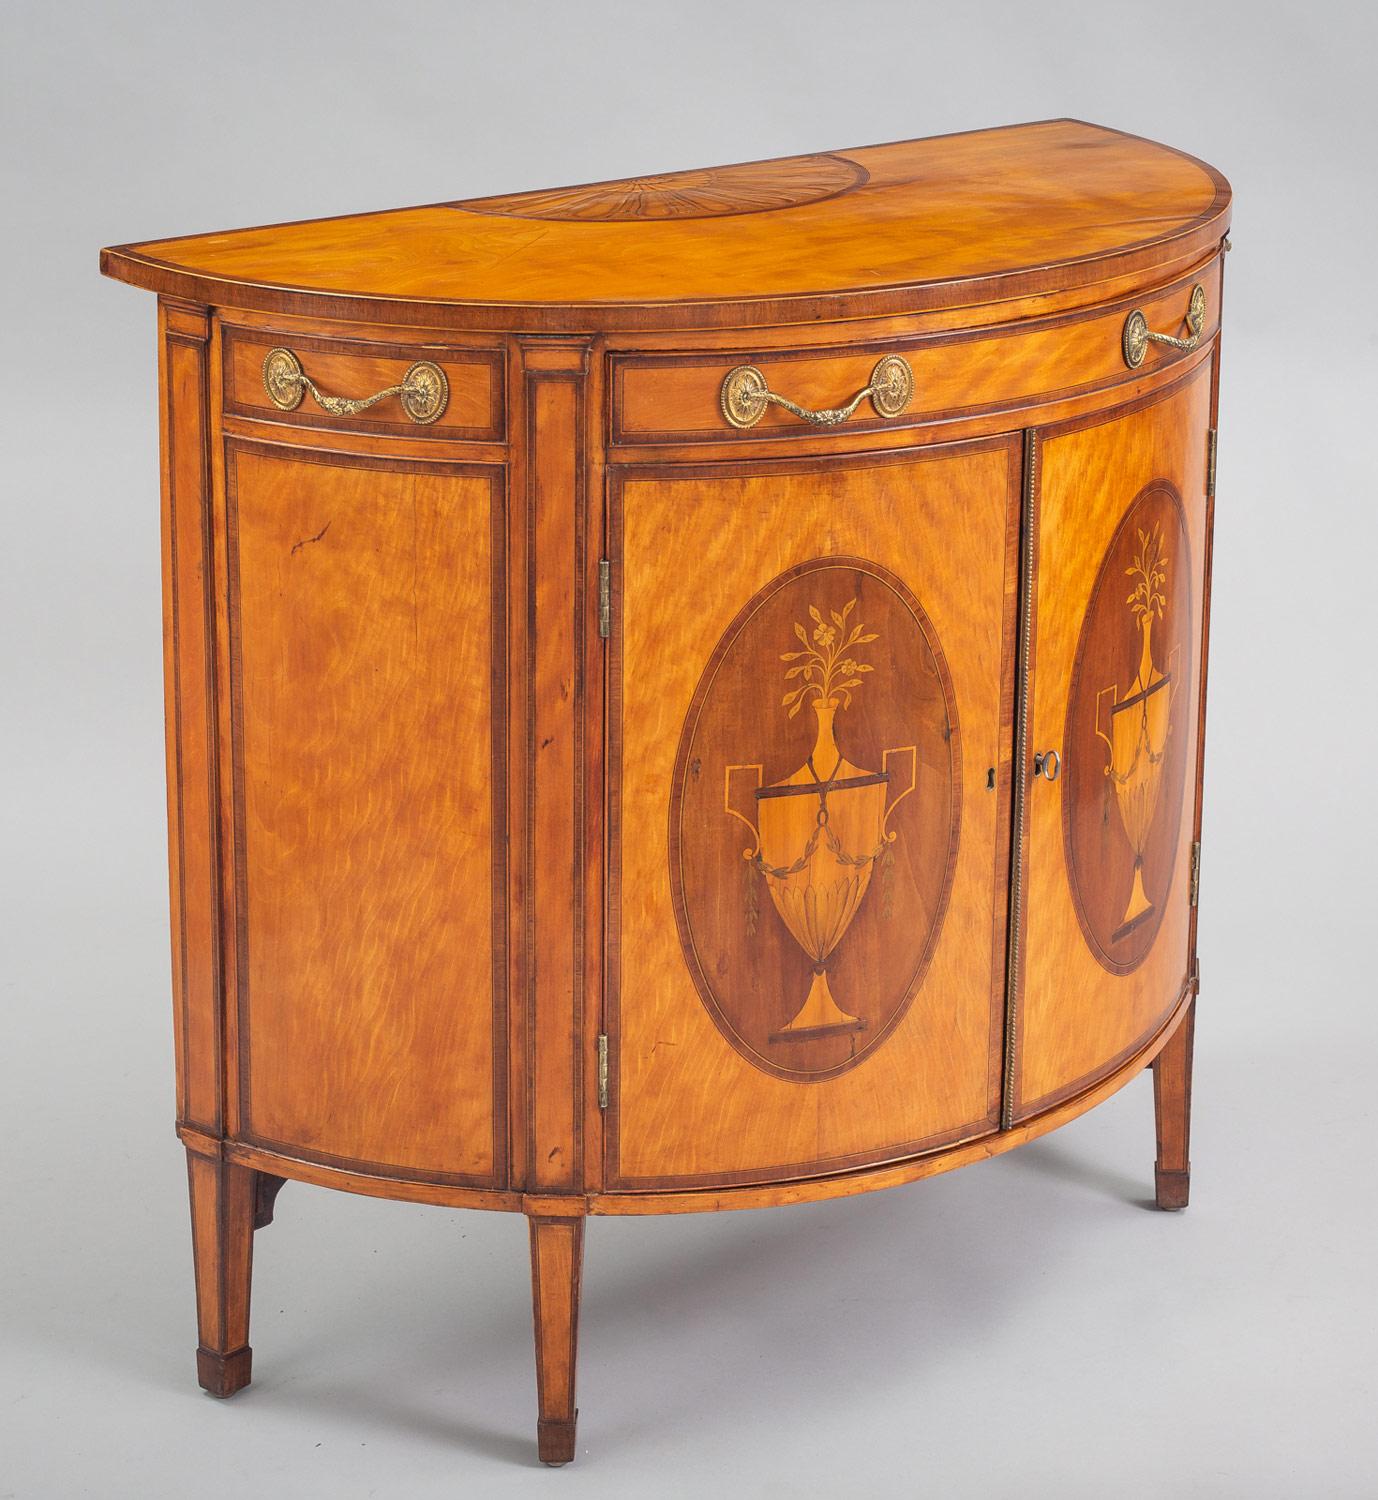 Fine George III satinwood demilune console cabinet inlaid with marquetry, crossbanded with mahogany, decorated with inlays of Grecian urns on the double doors, the top inlaid with shell and fan paterae, the single drawer with gilded handles and the